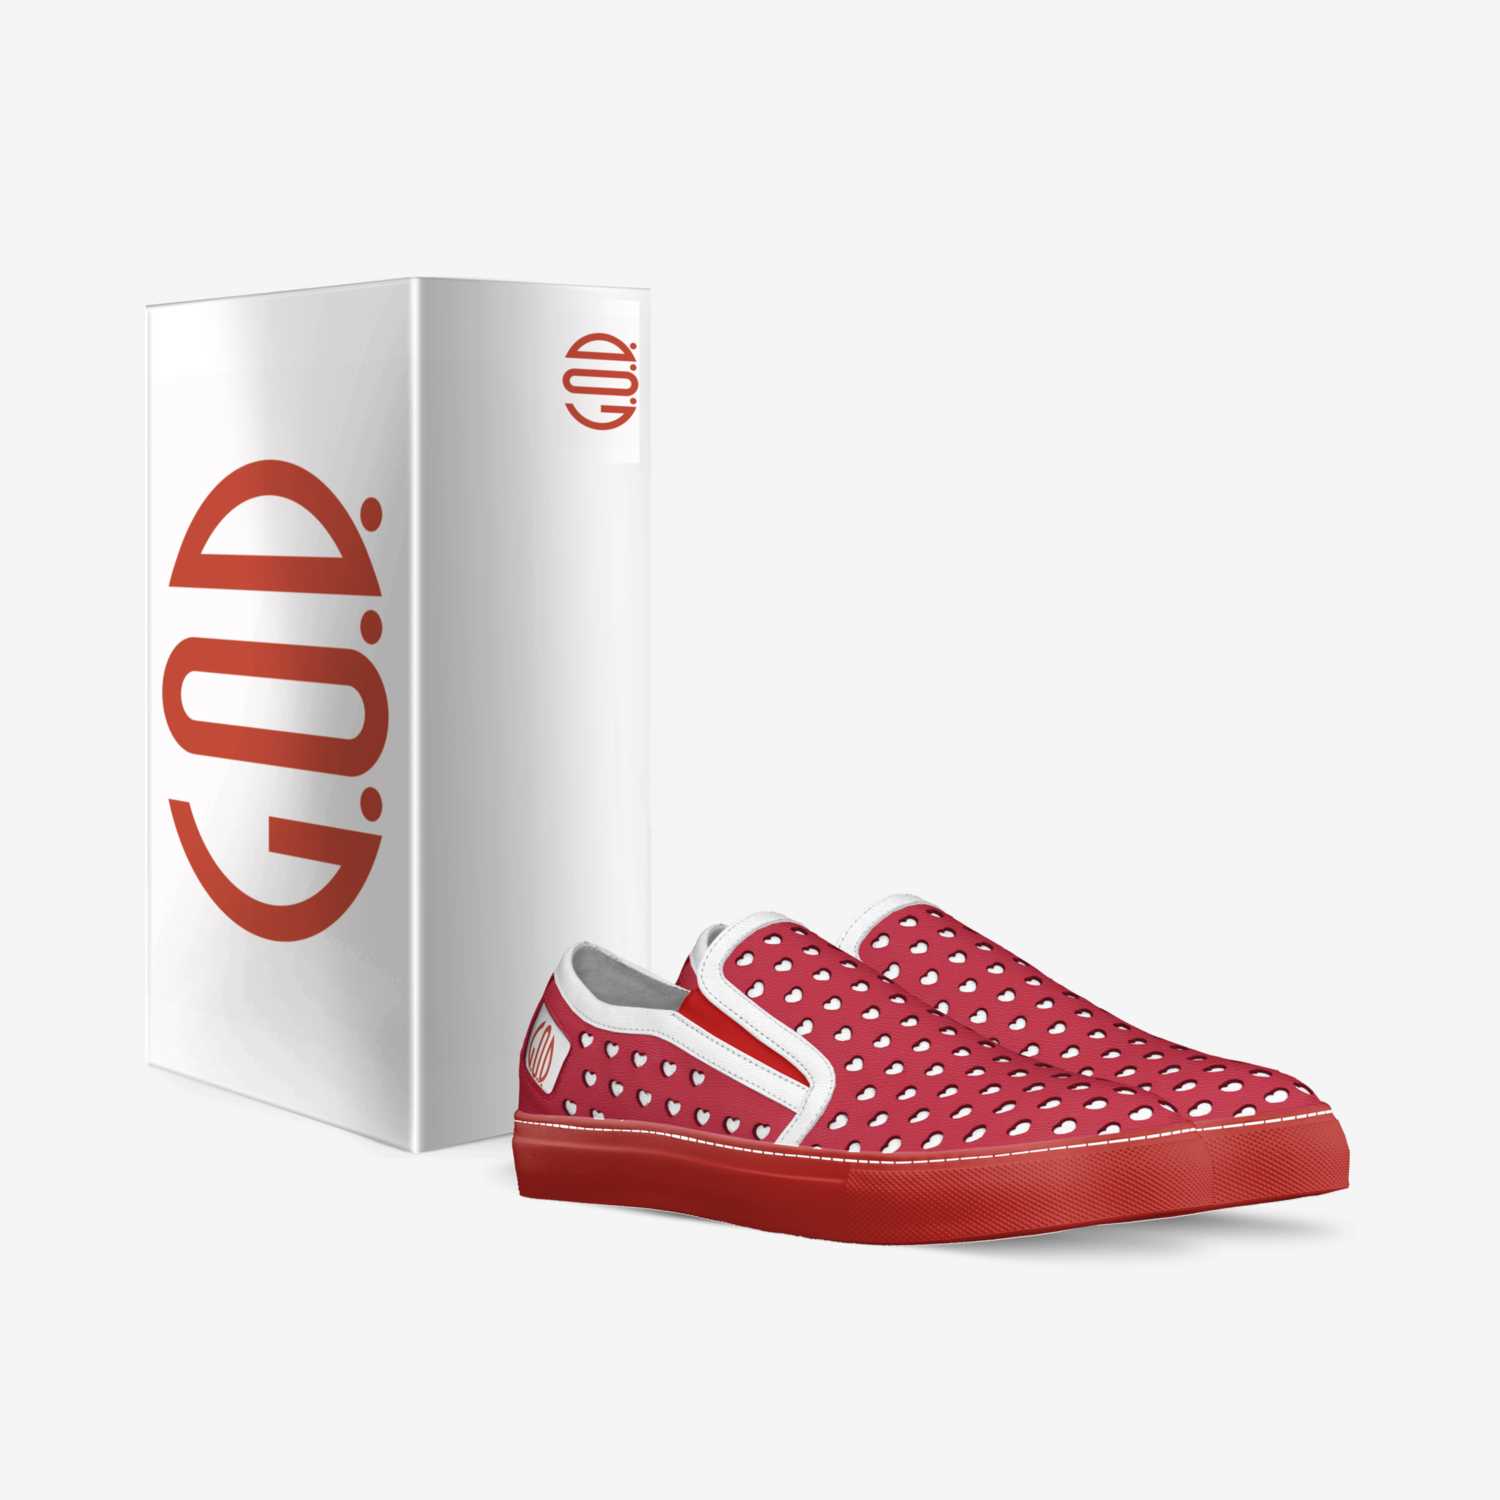 Be my valentine custom made in Italy shoes by G.O.D. | Box view